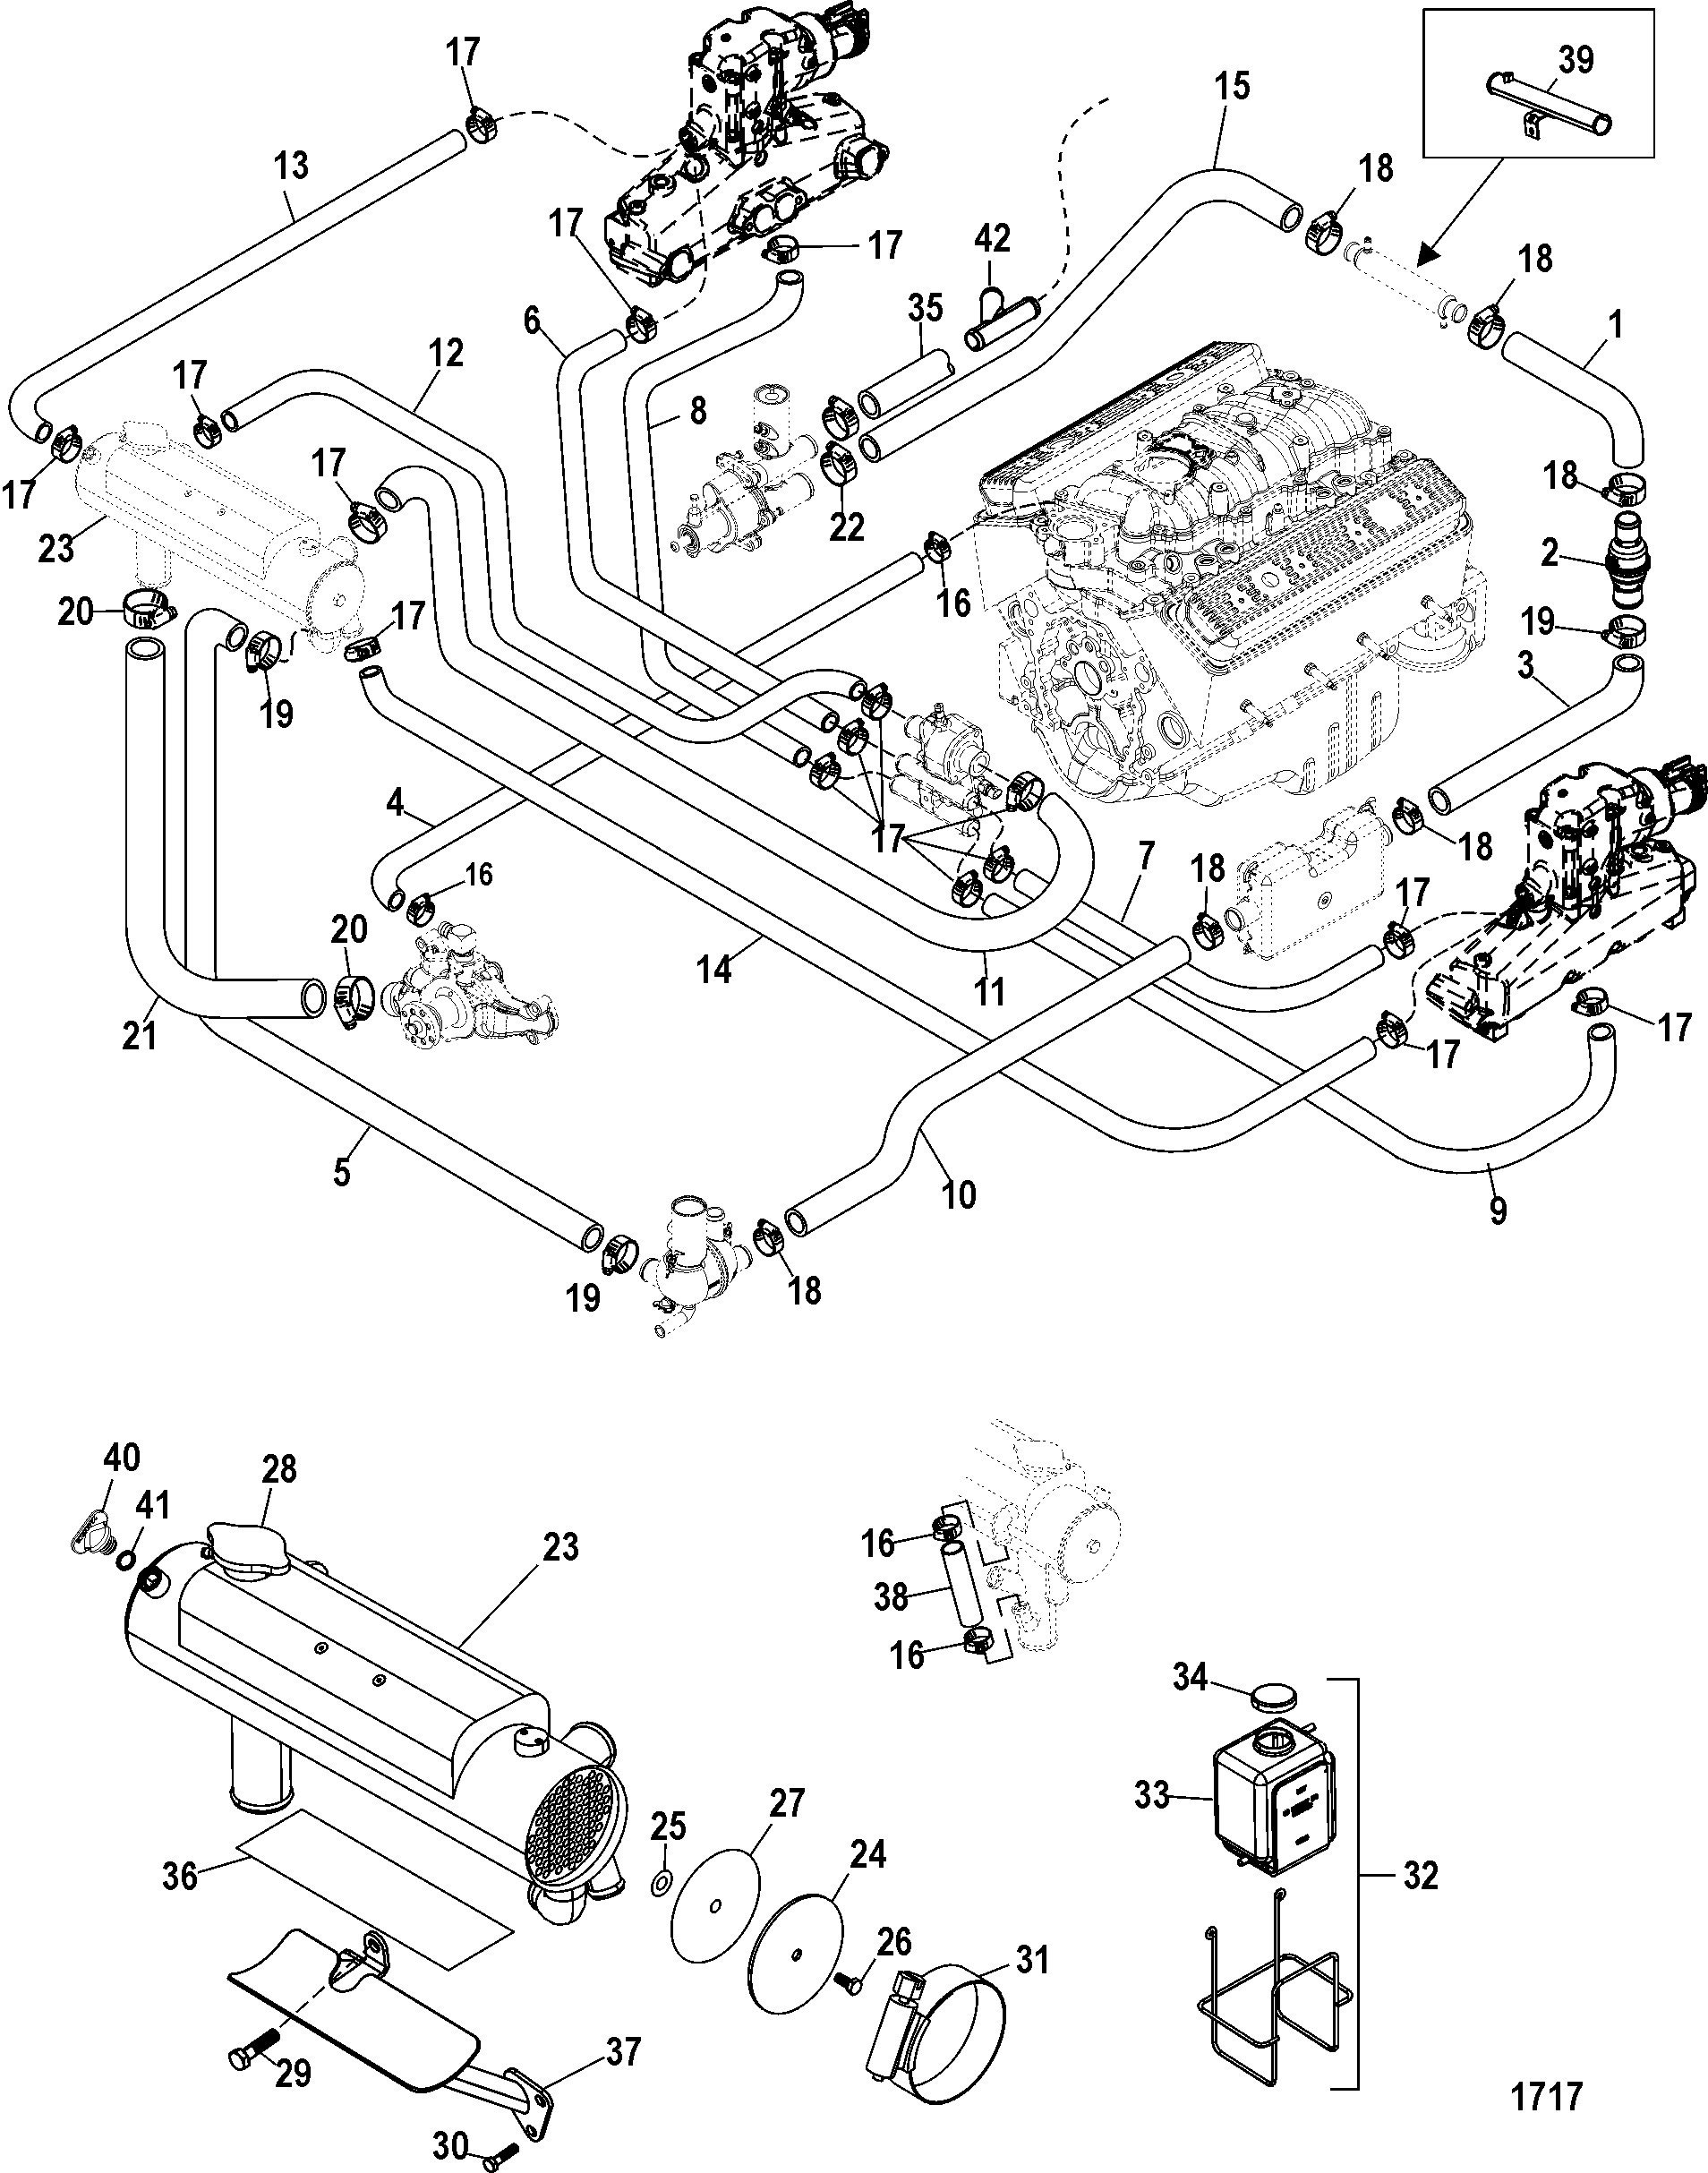 Automotive Cooling System Diagram Closed Cooling System for Mercruiser 5 0l 350 Mag Mx 6 2l Mpi Sterndrive Of Automotive Cooling System Diagram